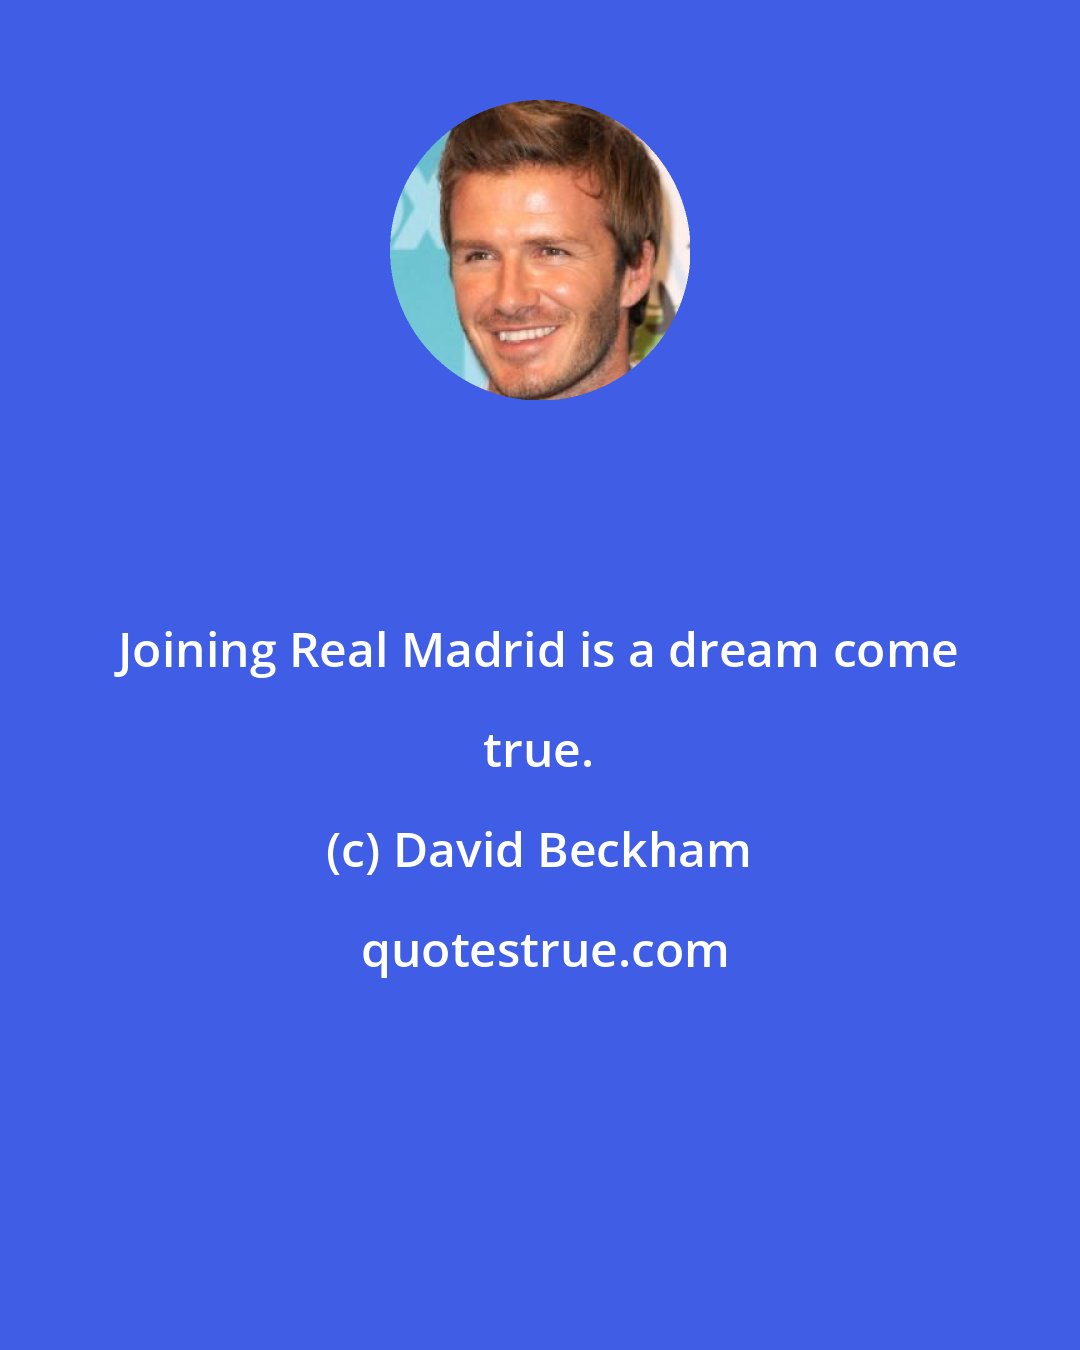 David Beckham: Joining Real Madrid is a dream come true.